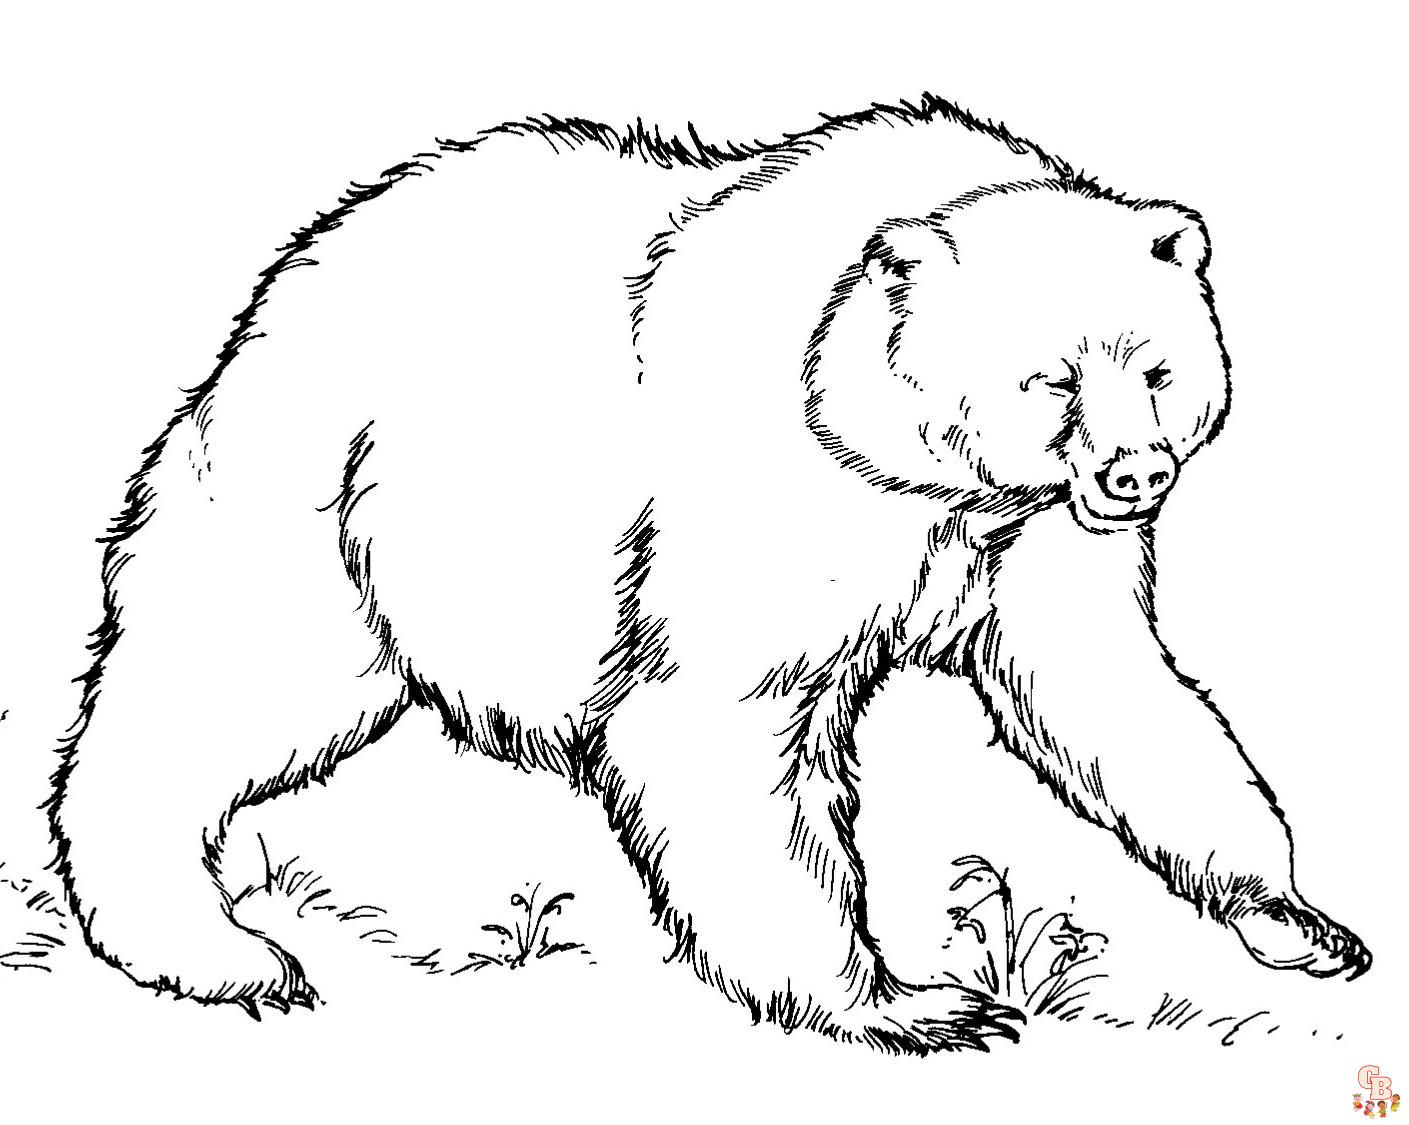 Live bear in a den coloring book for kids